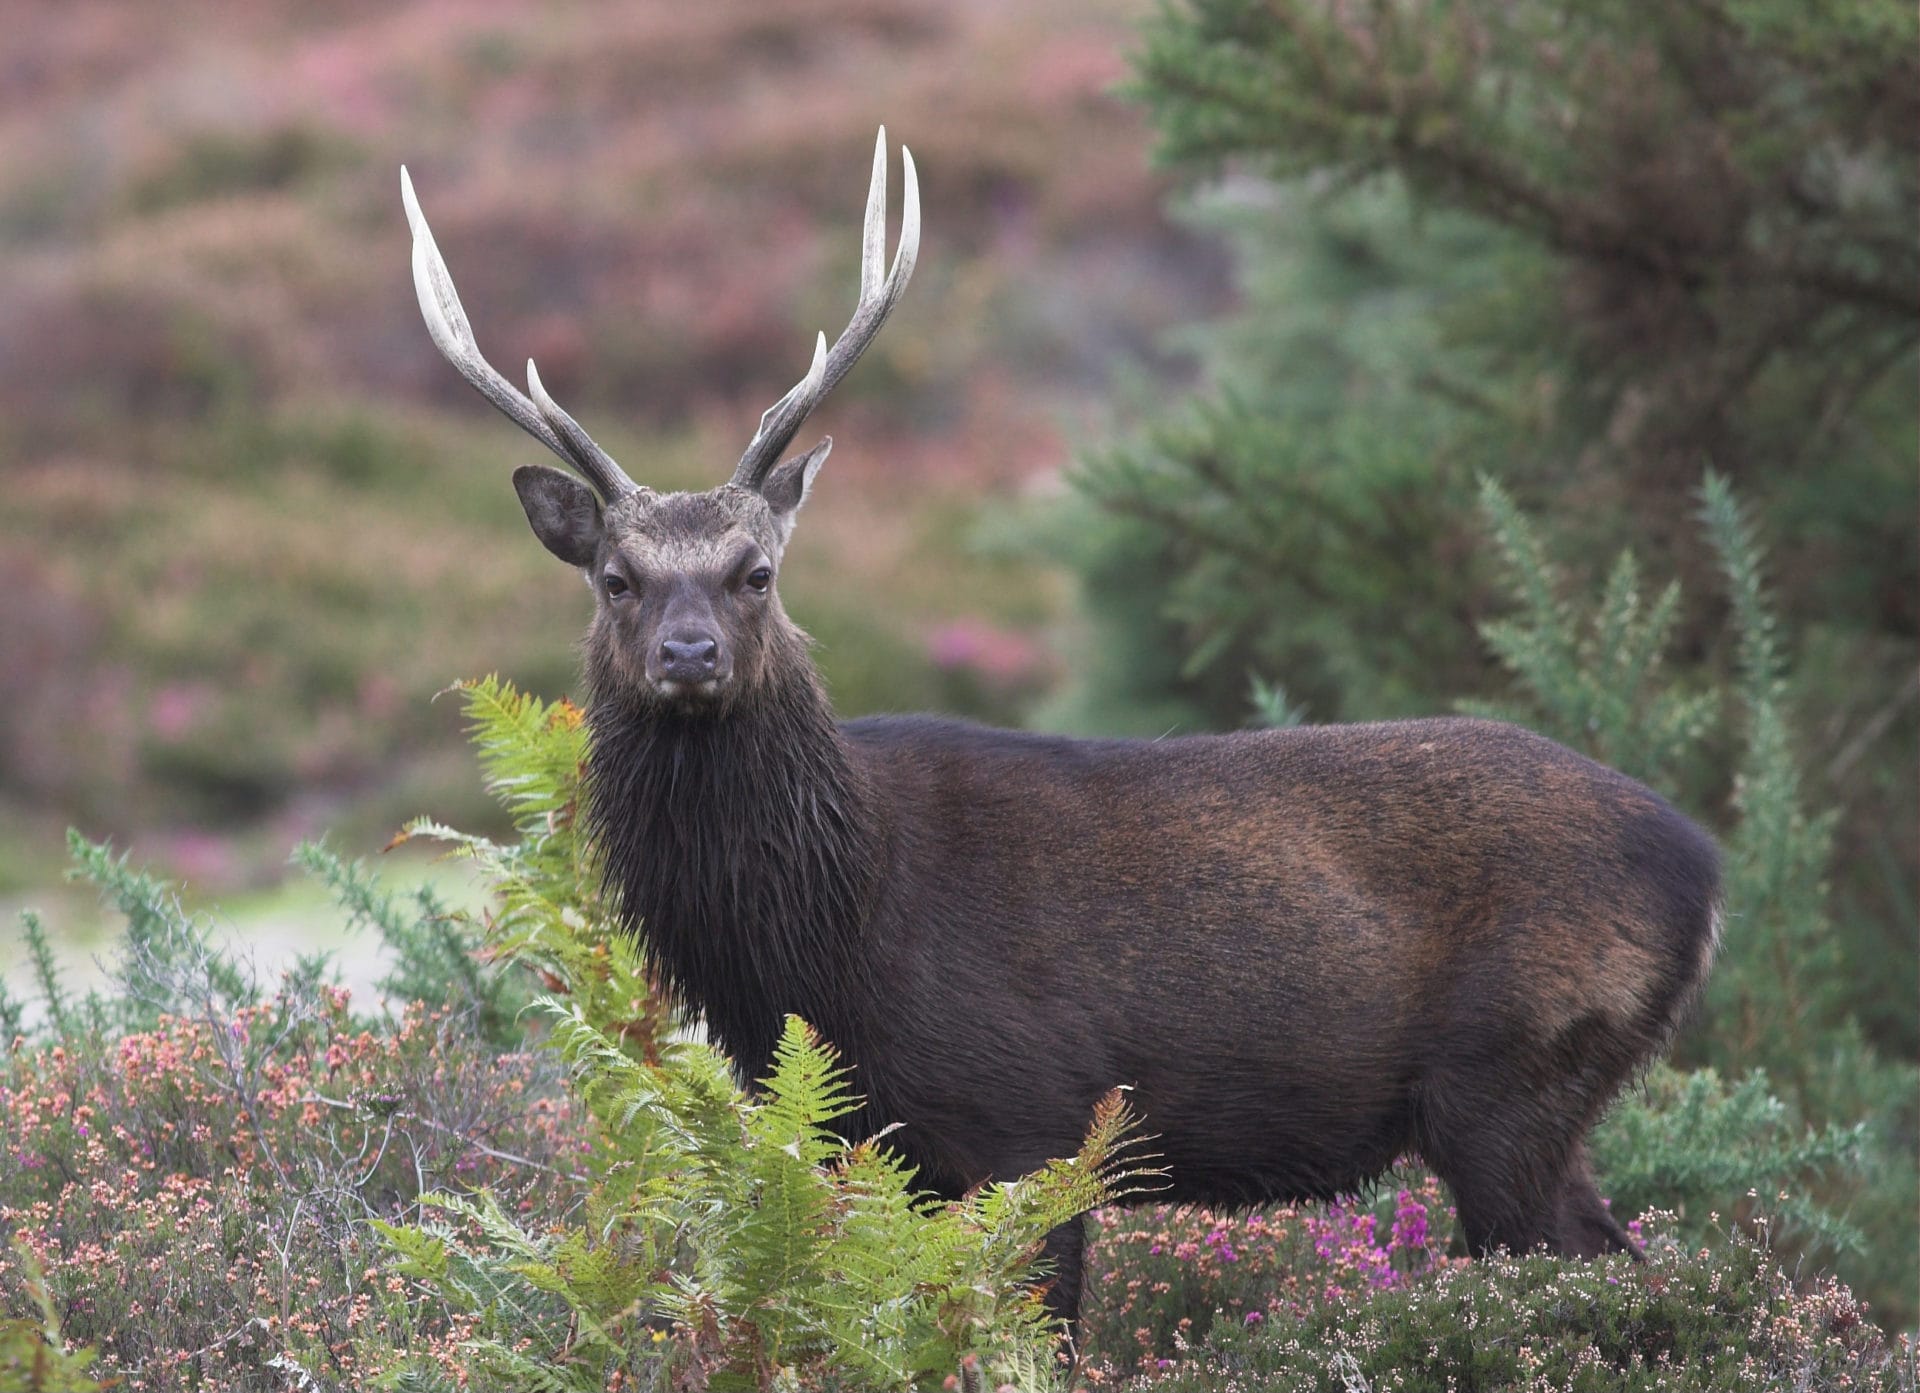 Highland hunting clients paying up to £8,000 to shoot animals